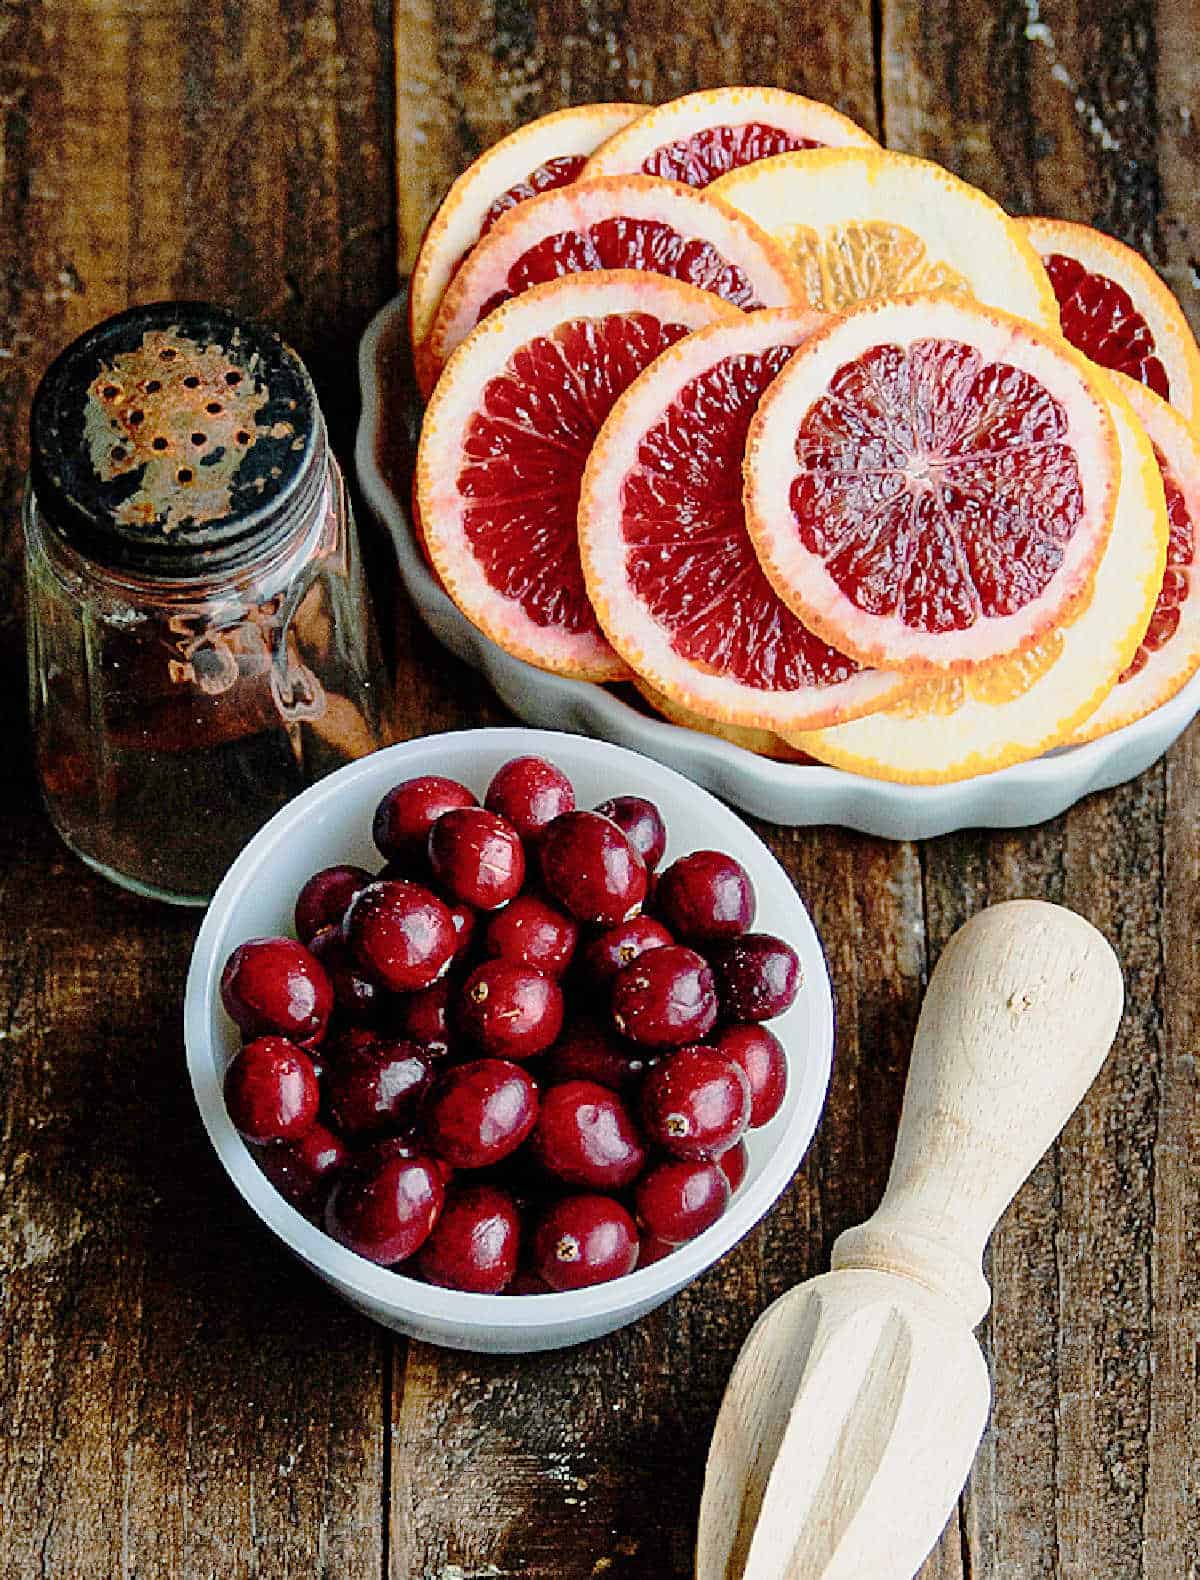 Bowls with cranberries and blood orange slices on a wooden surface. Citrus wooden hand juicer.